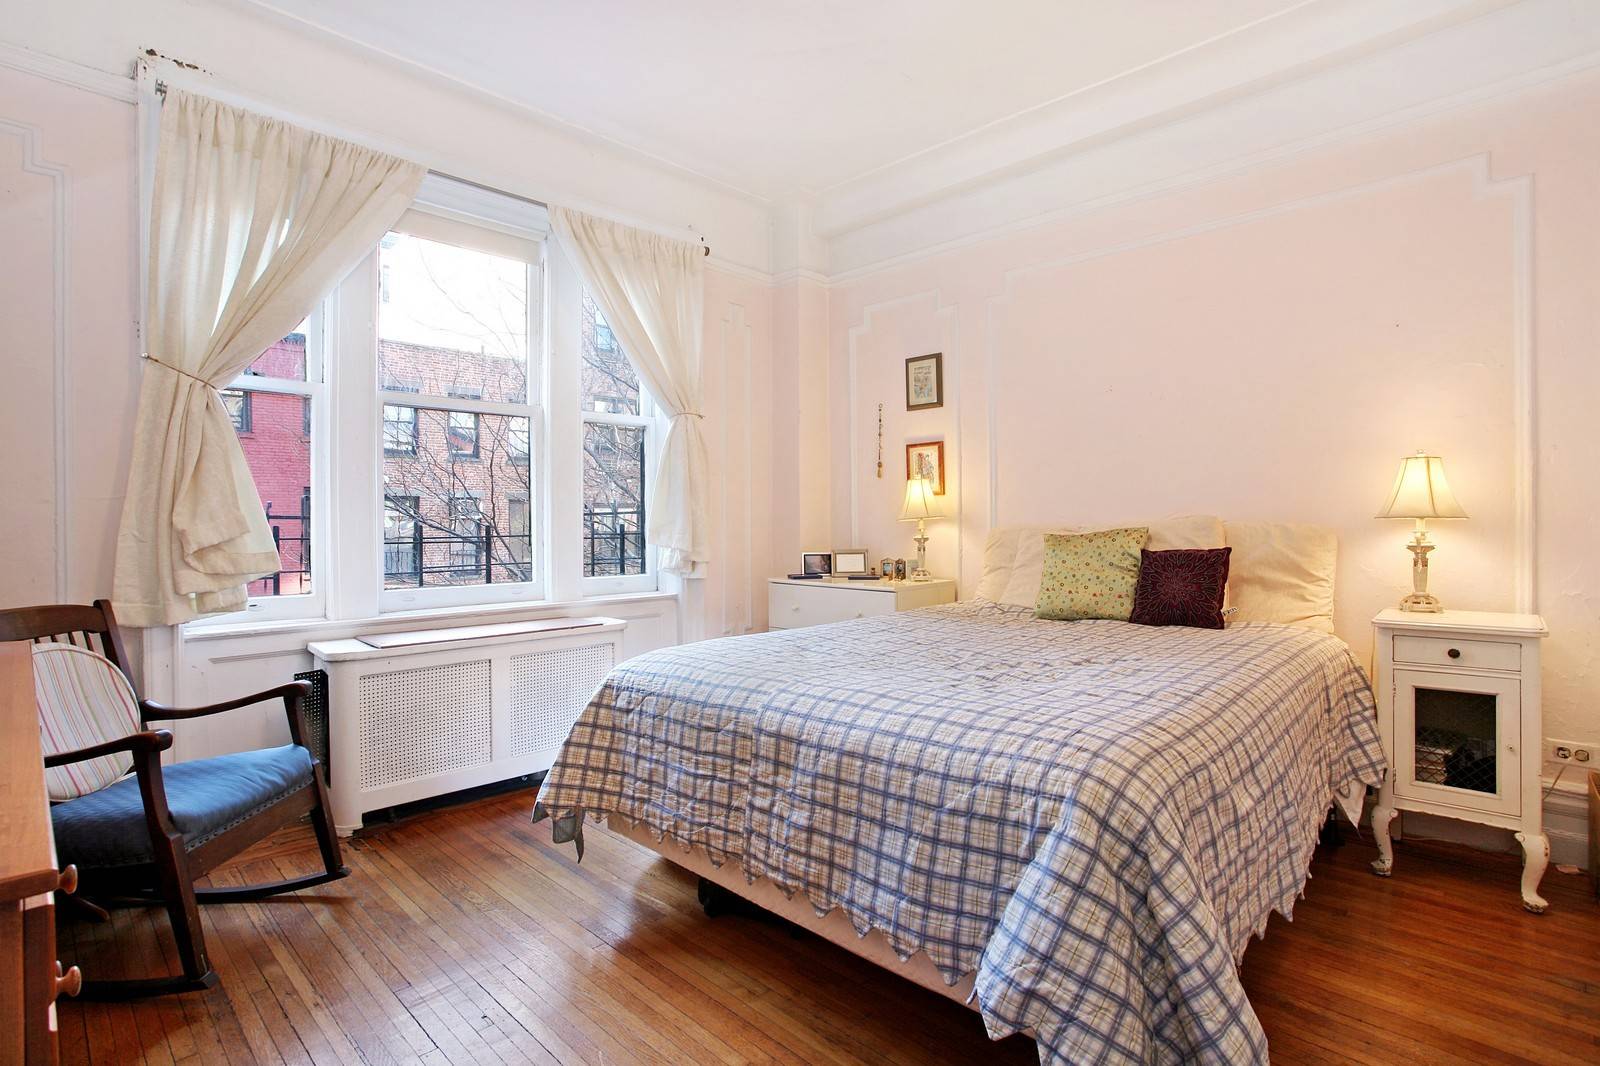 UWS Huge 2 bed plus dining room Steps to Central Park Great Share.